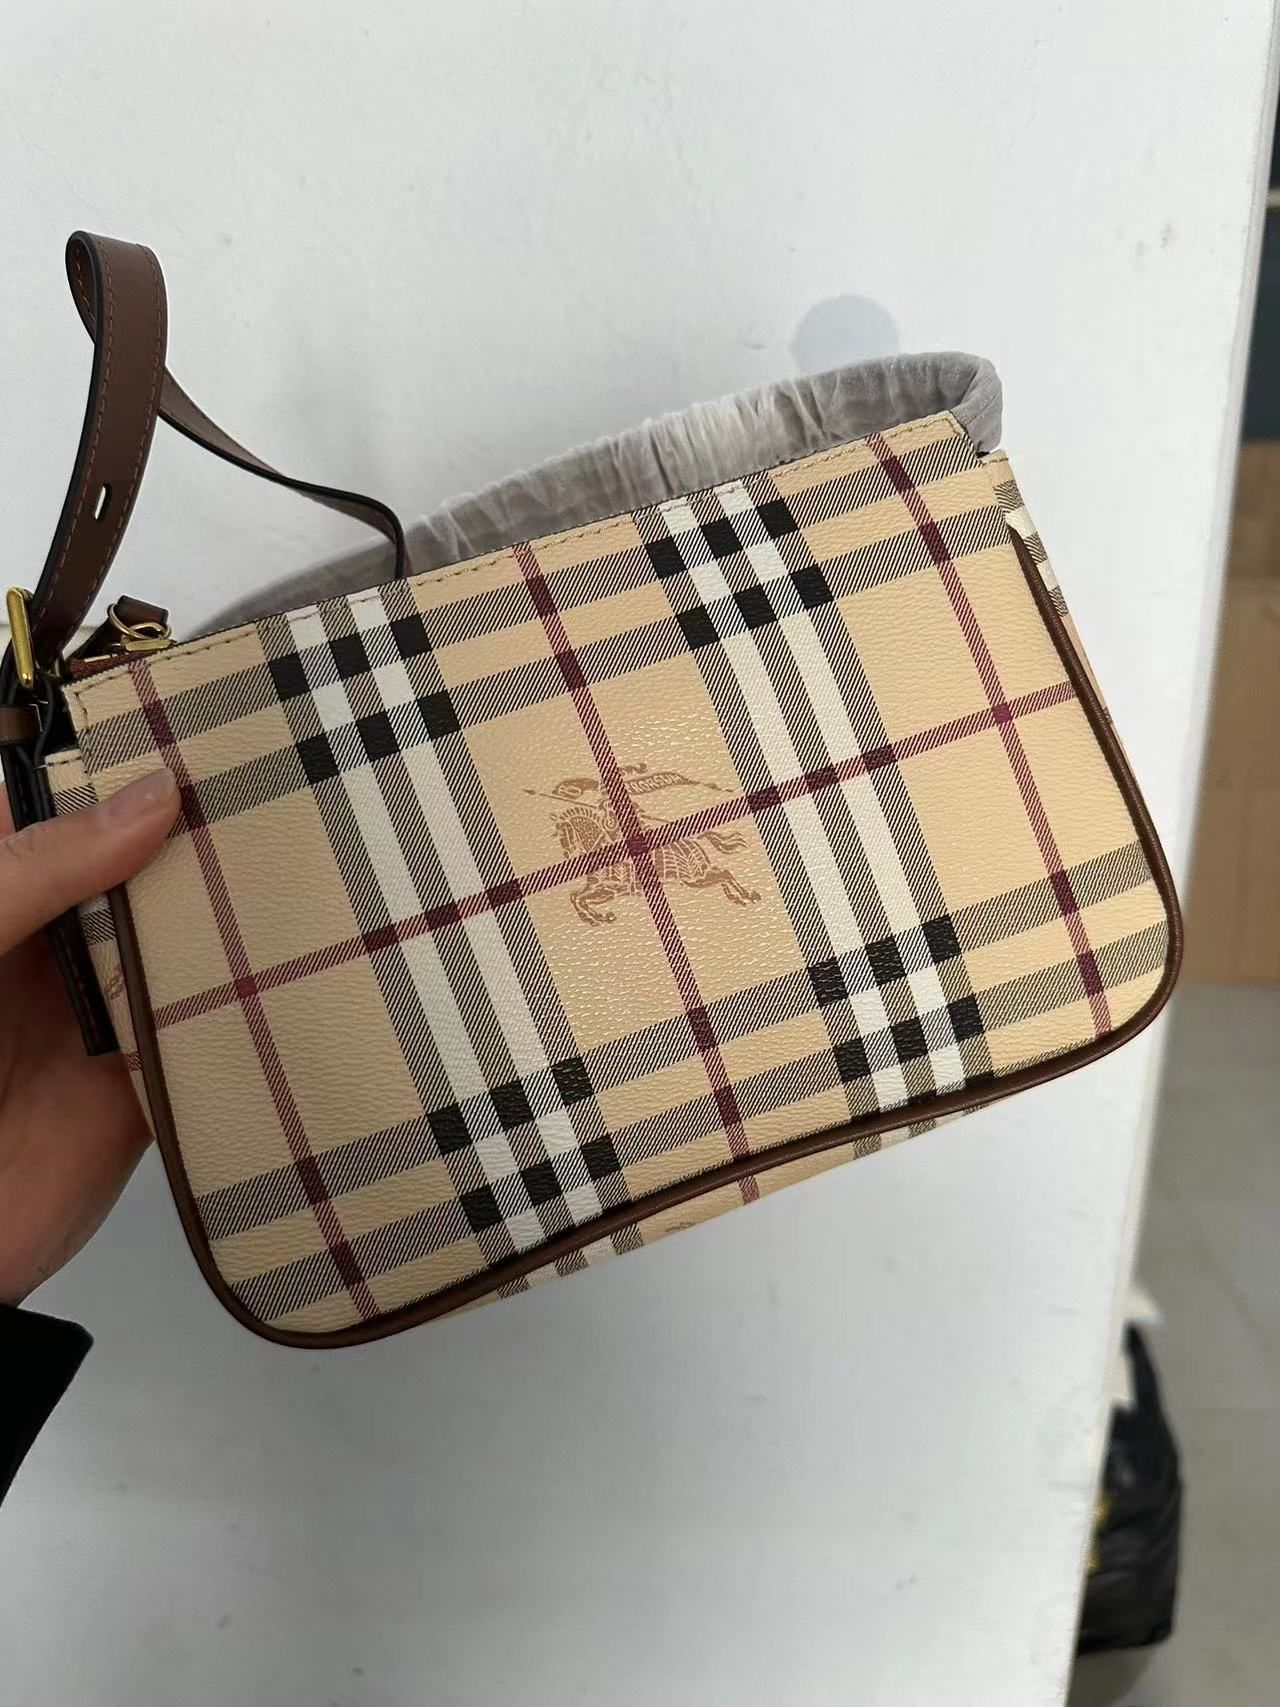 Burberry Lunch Bag – In Wang Vintage